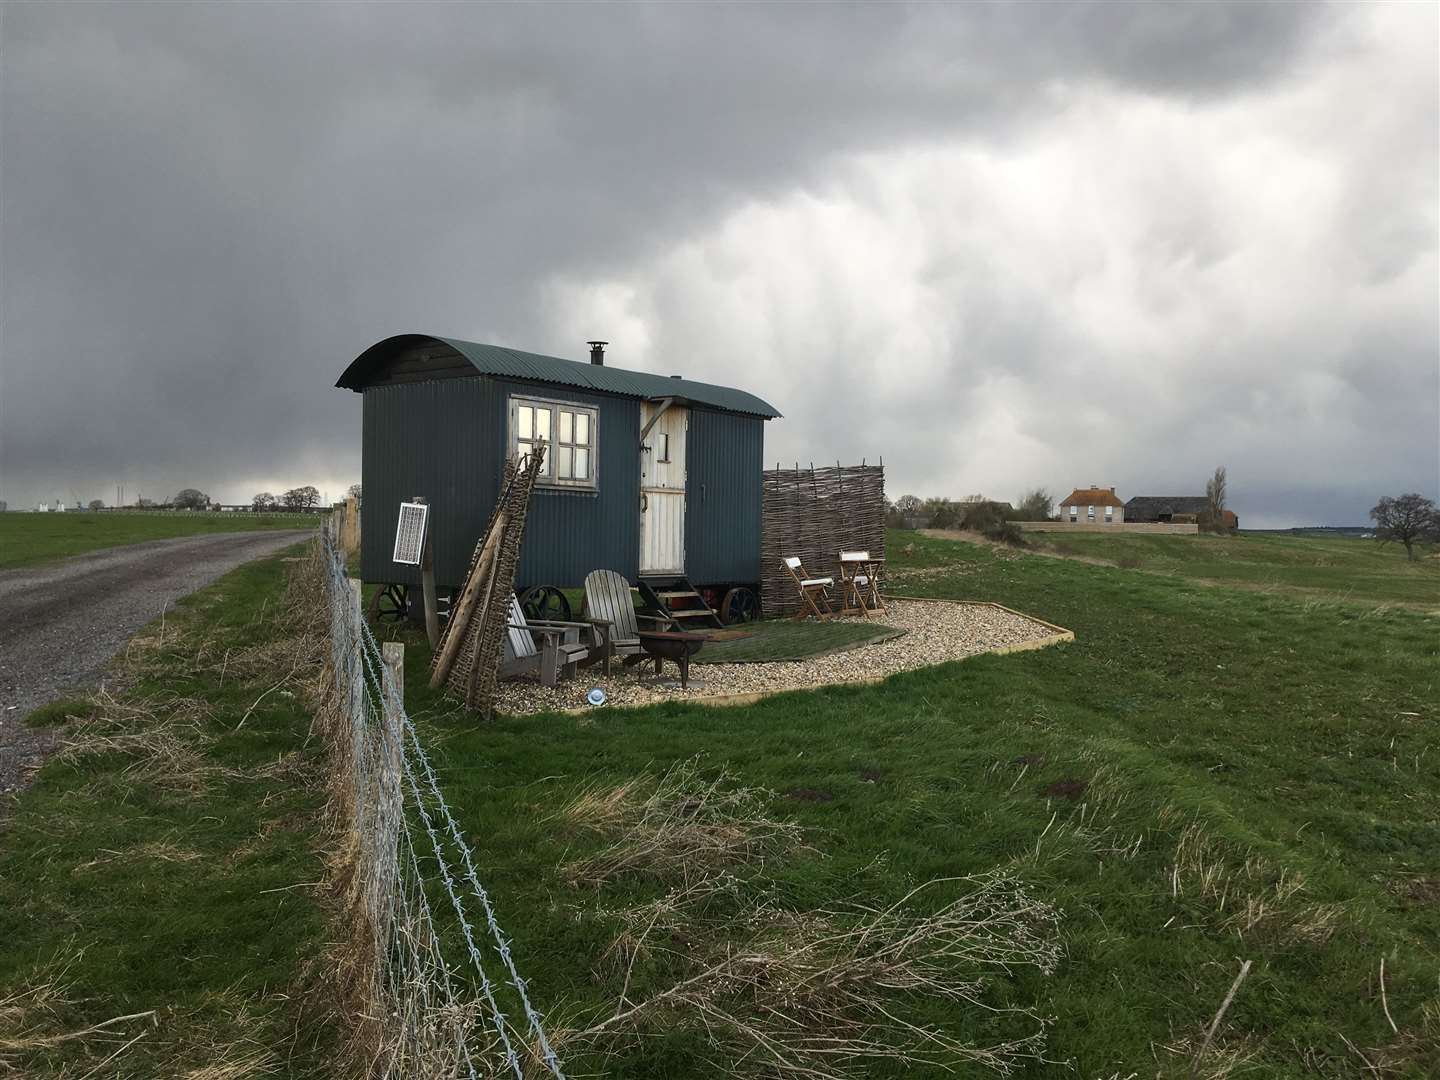 One of the first shepherd's huts at Elmley Nature Reserve, Sheppey